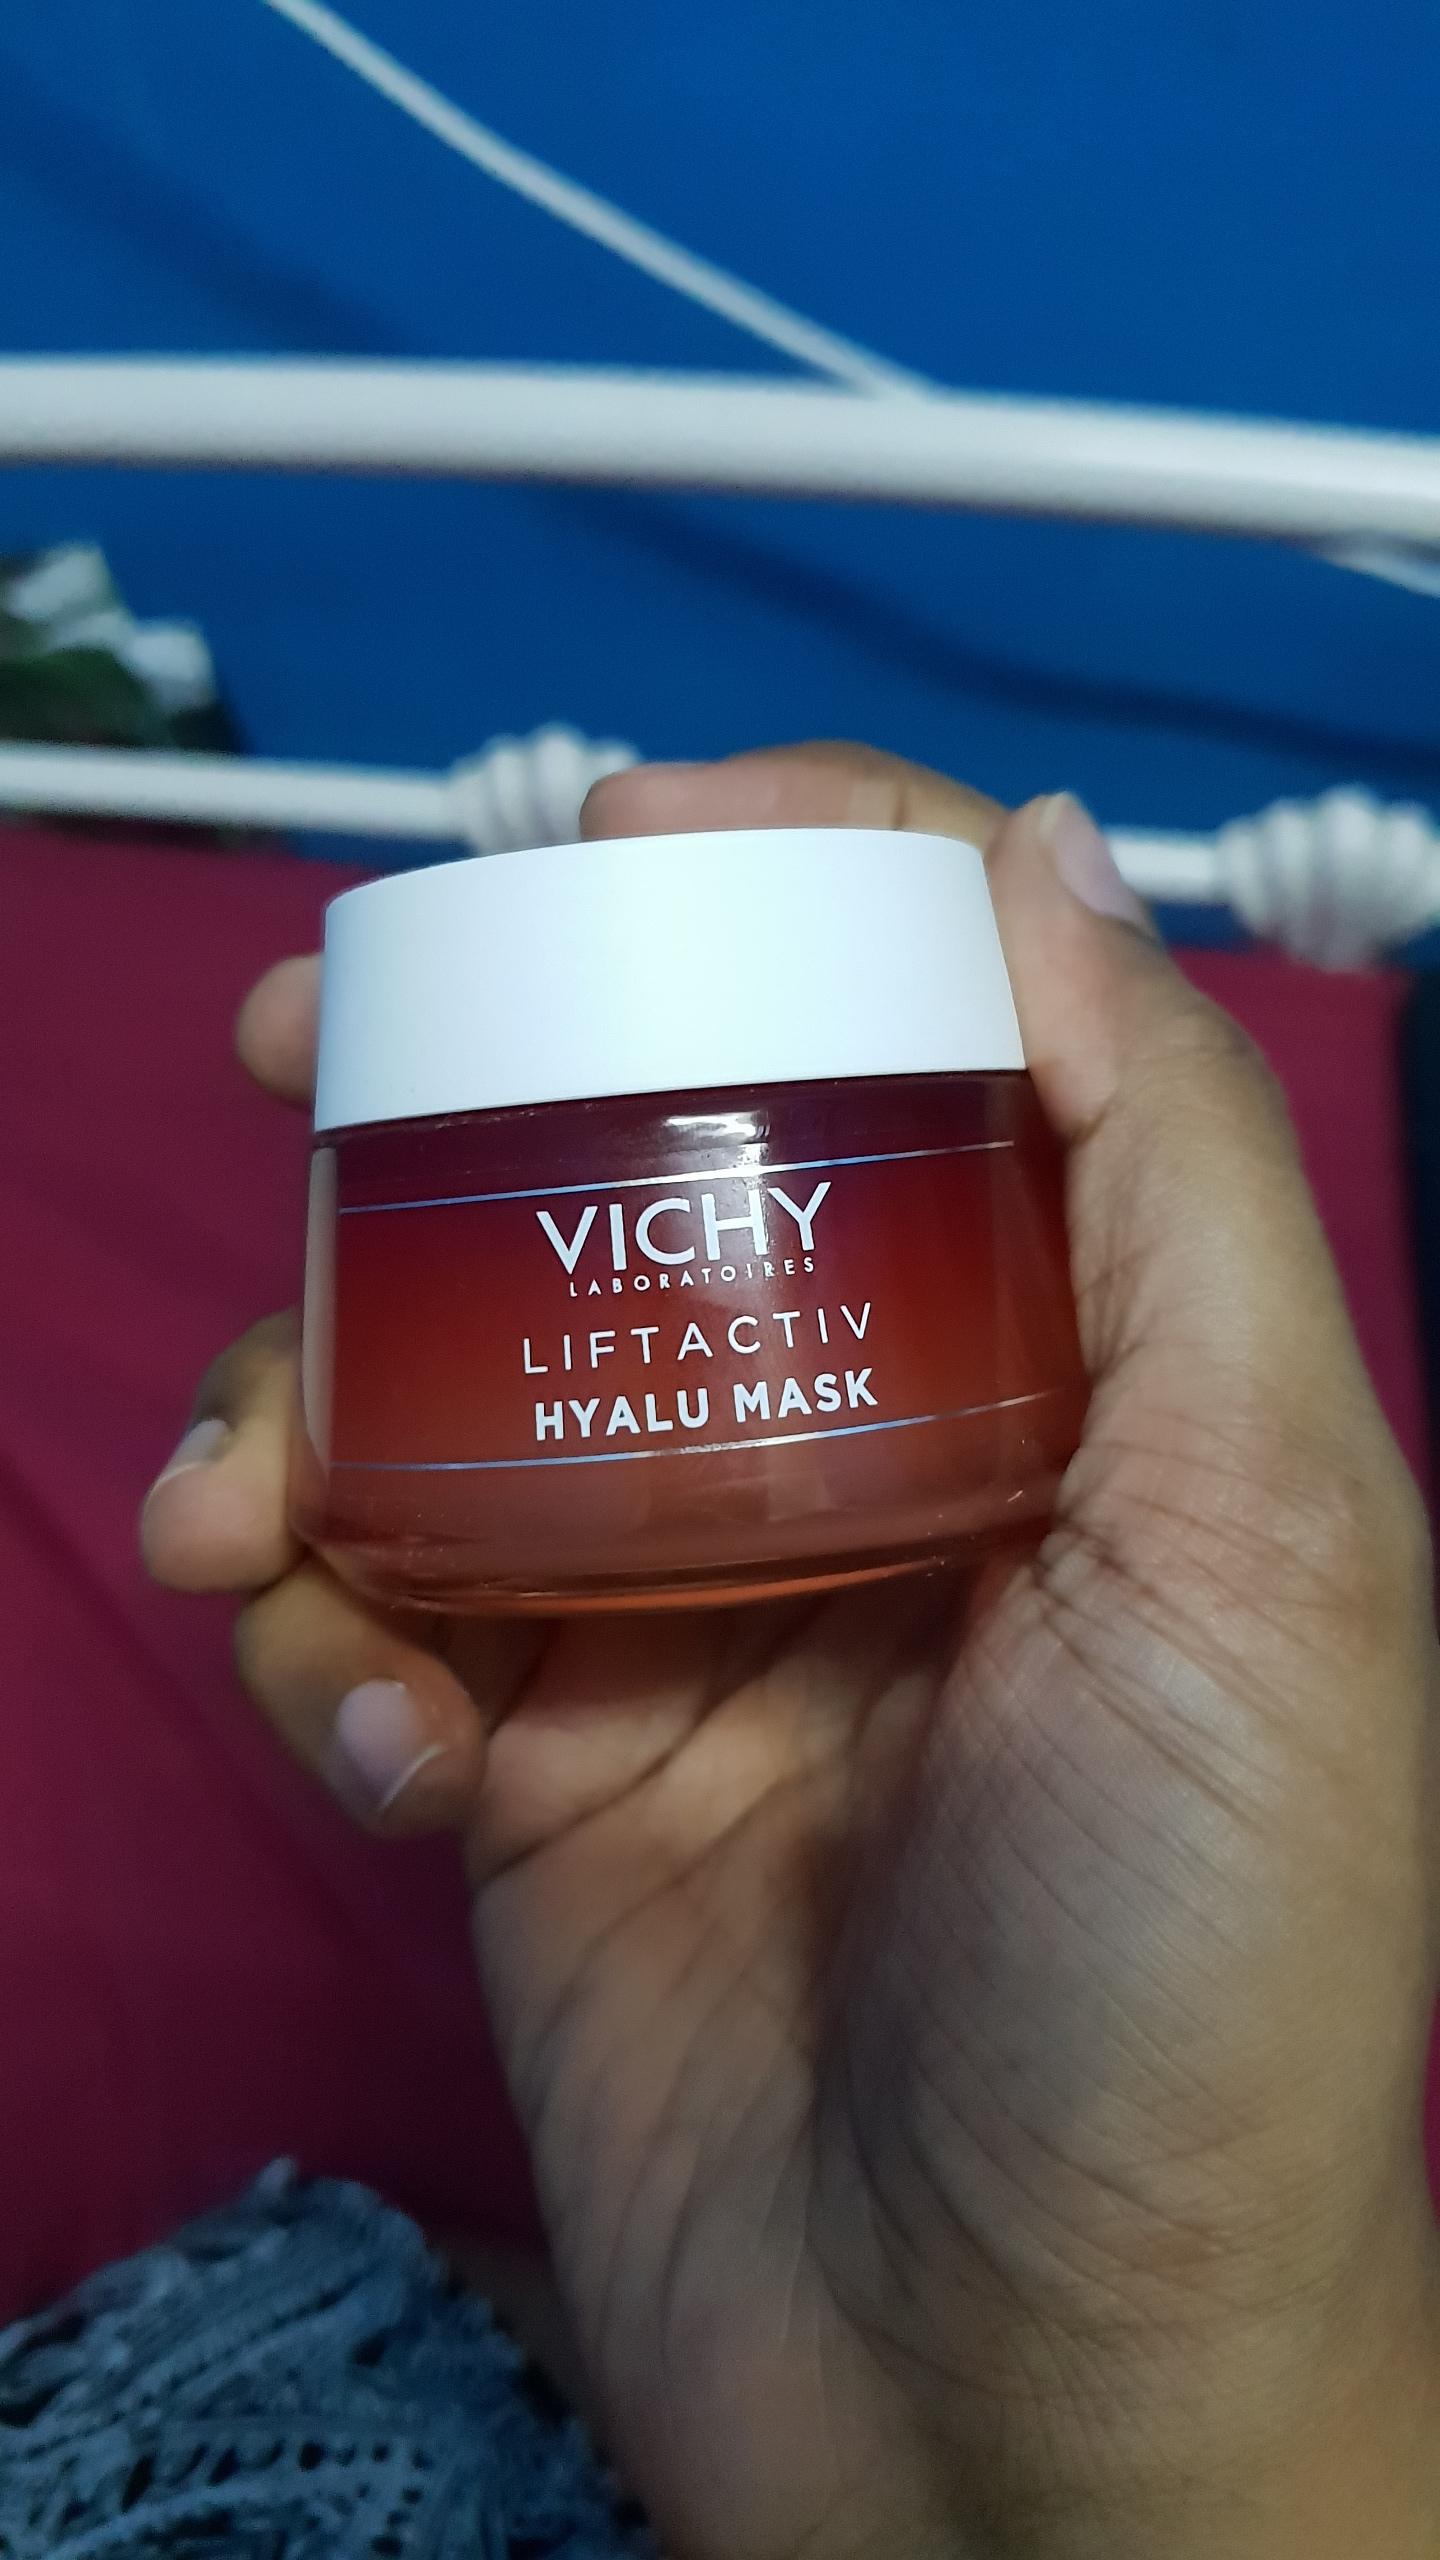 Vertrouwen op opgraven Wafel Vichy liftactiv hyalu mask by Vichy : review - Face care- Tryandreview.com